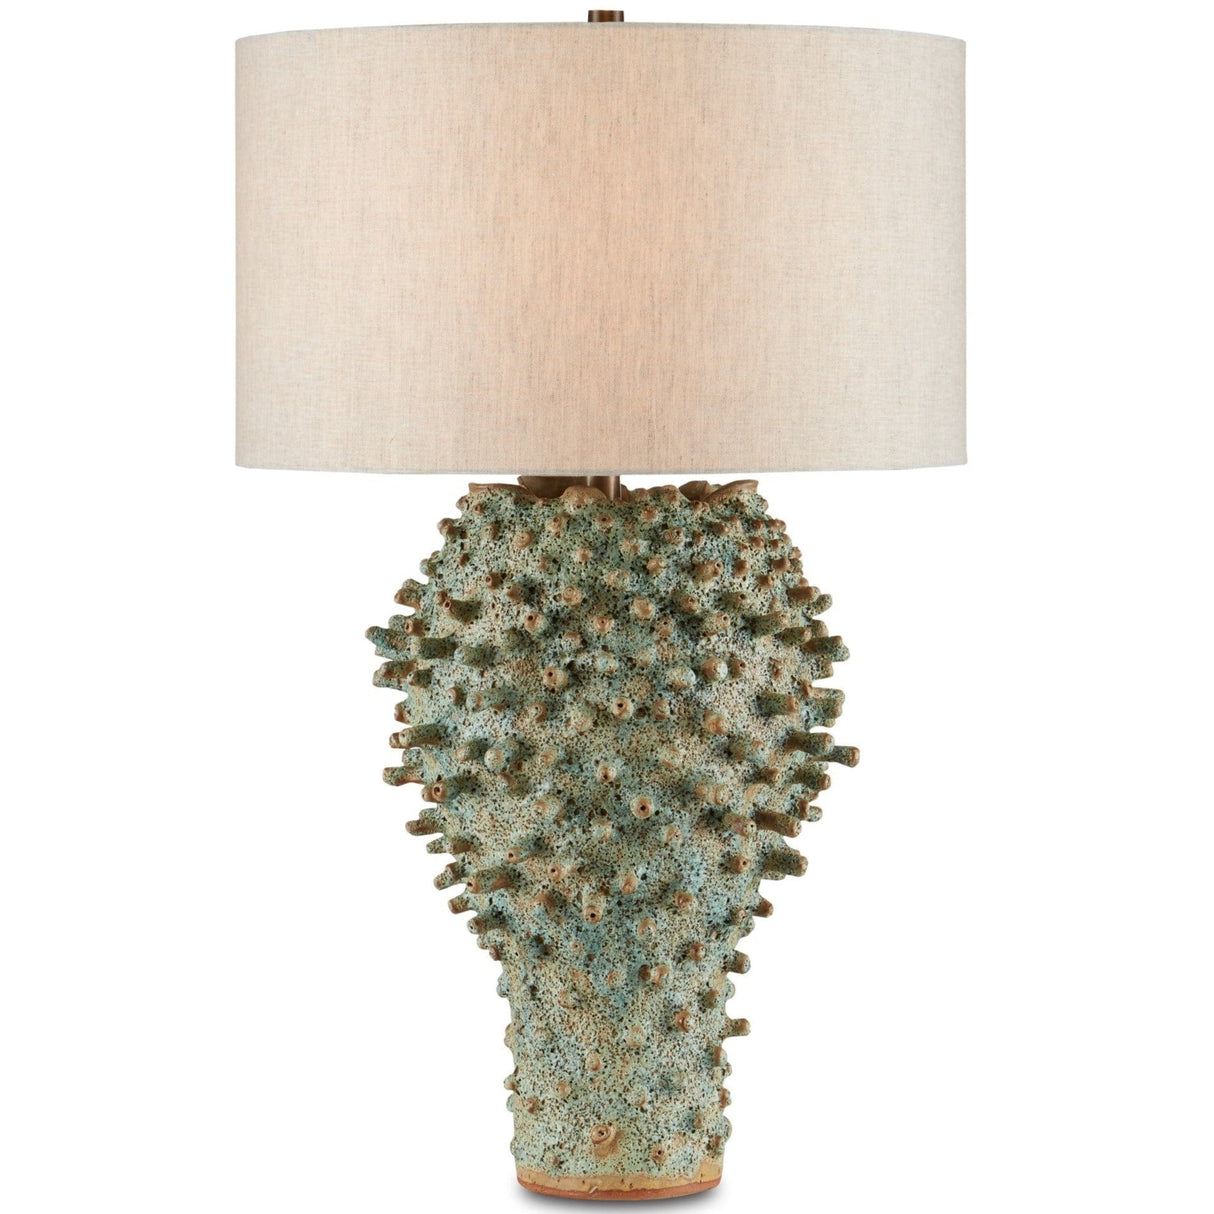 Currey & Company Sea Urchin Table Lamp Table Lamps currey-co-6000-0744 633306041516